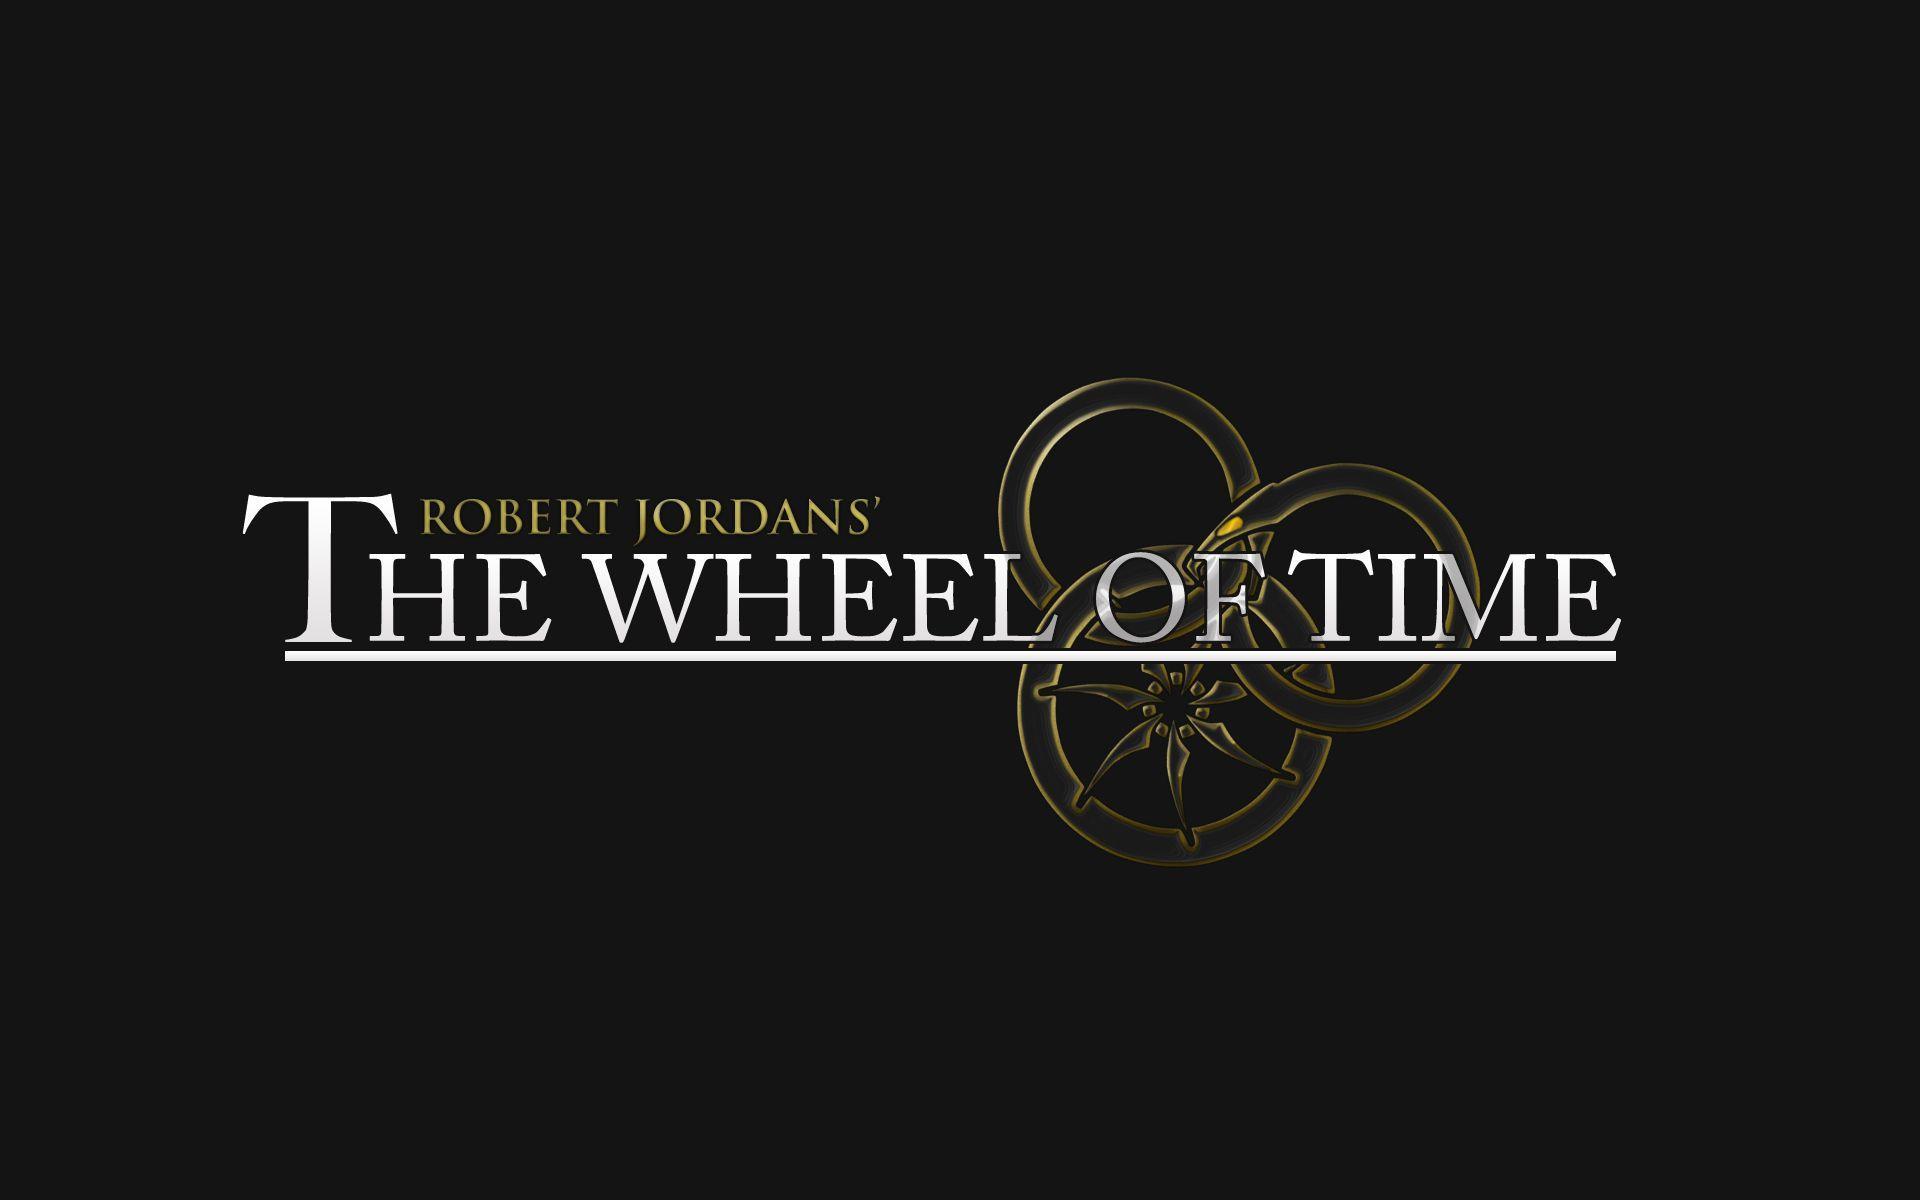 Some 'The Wheel of Time' Wallpaper